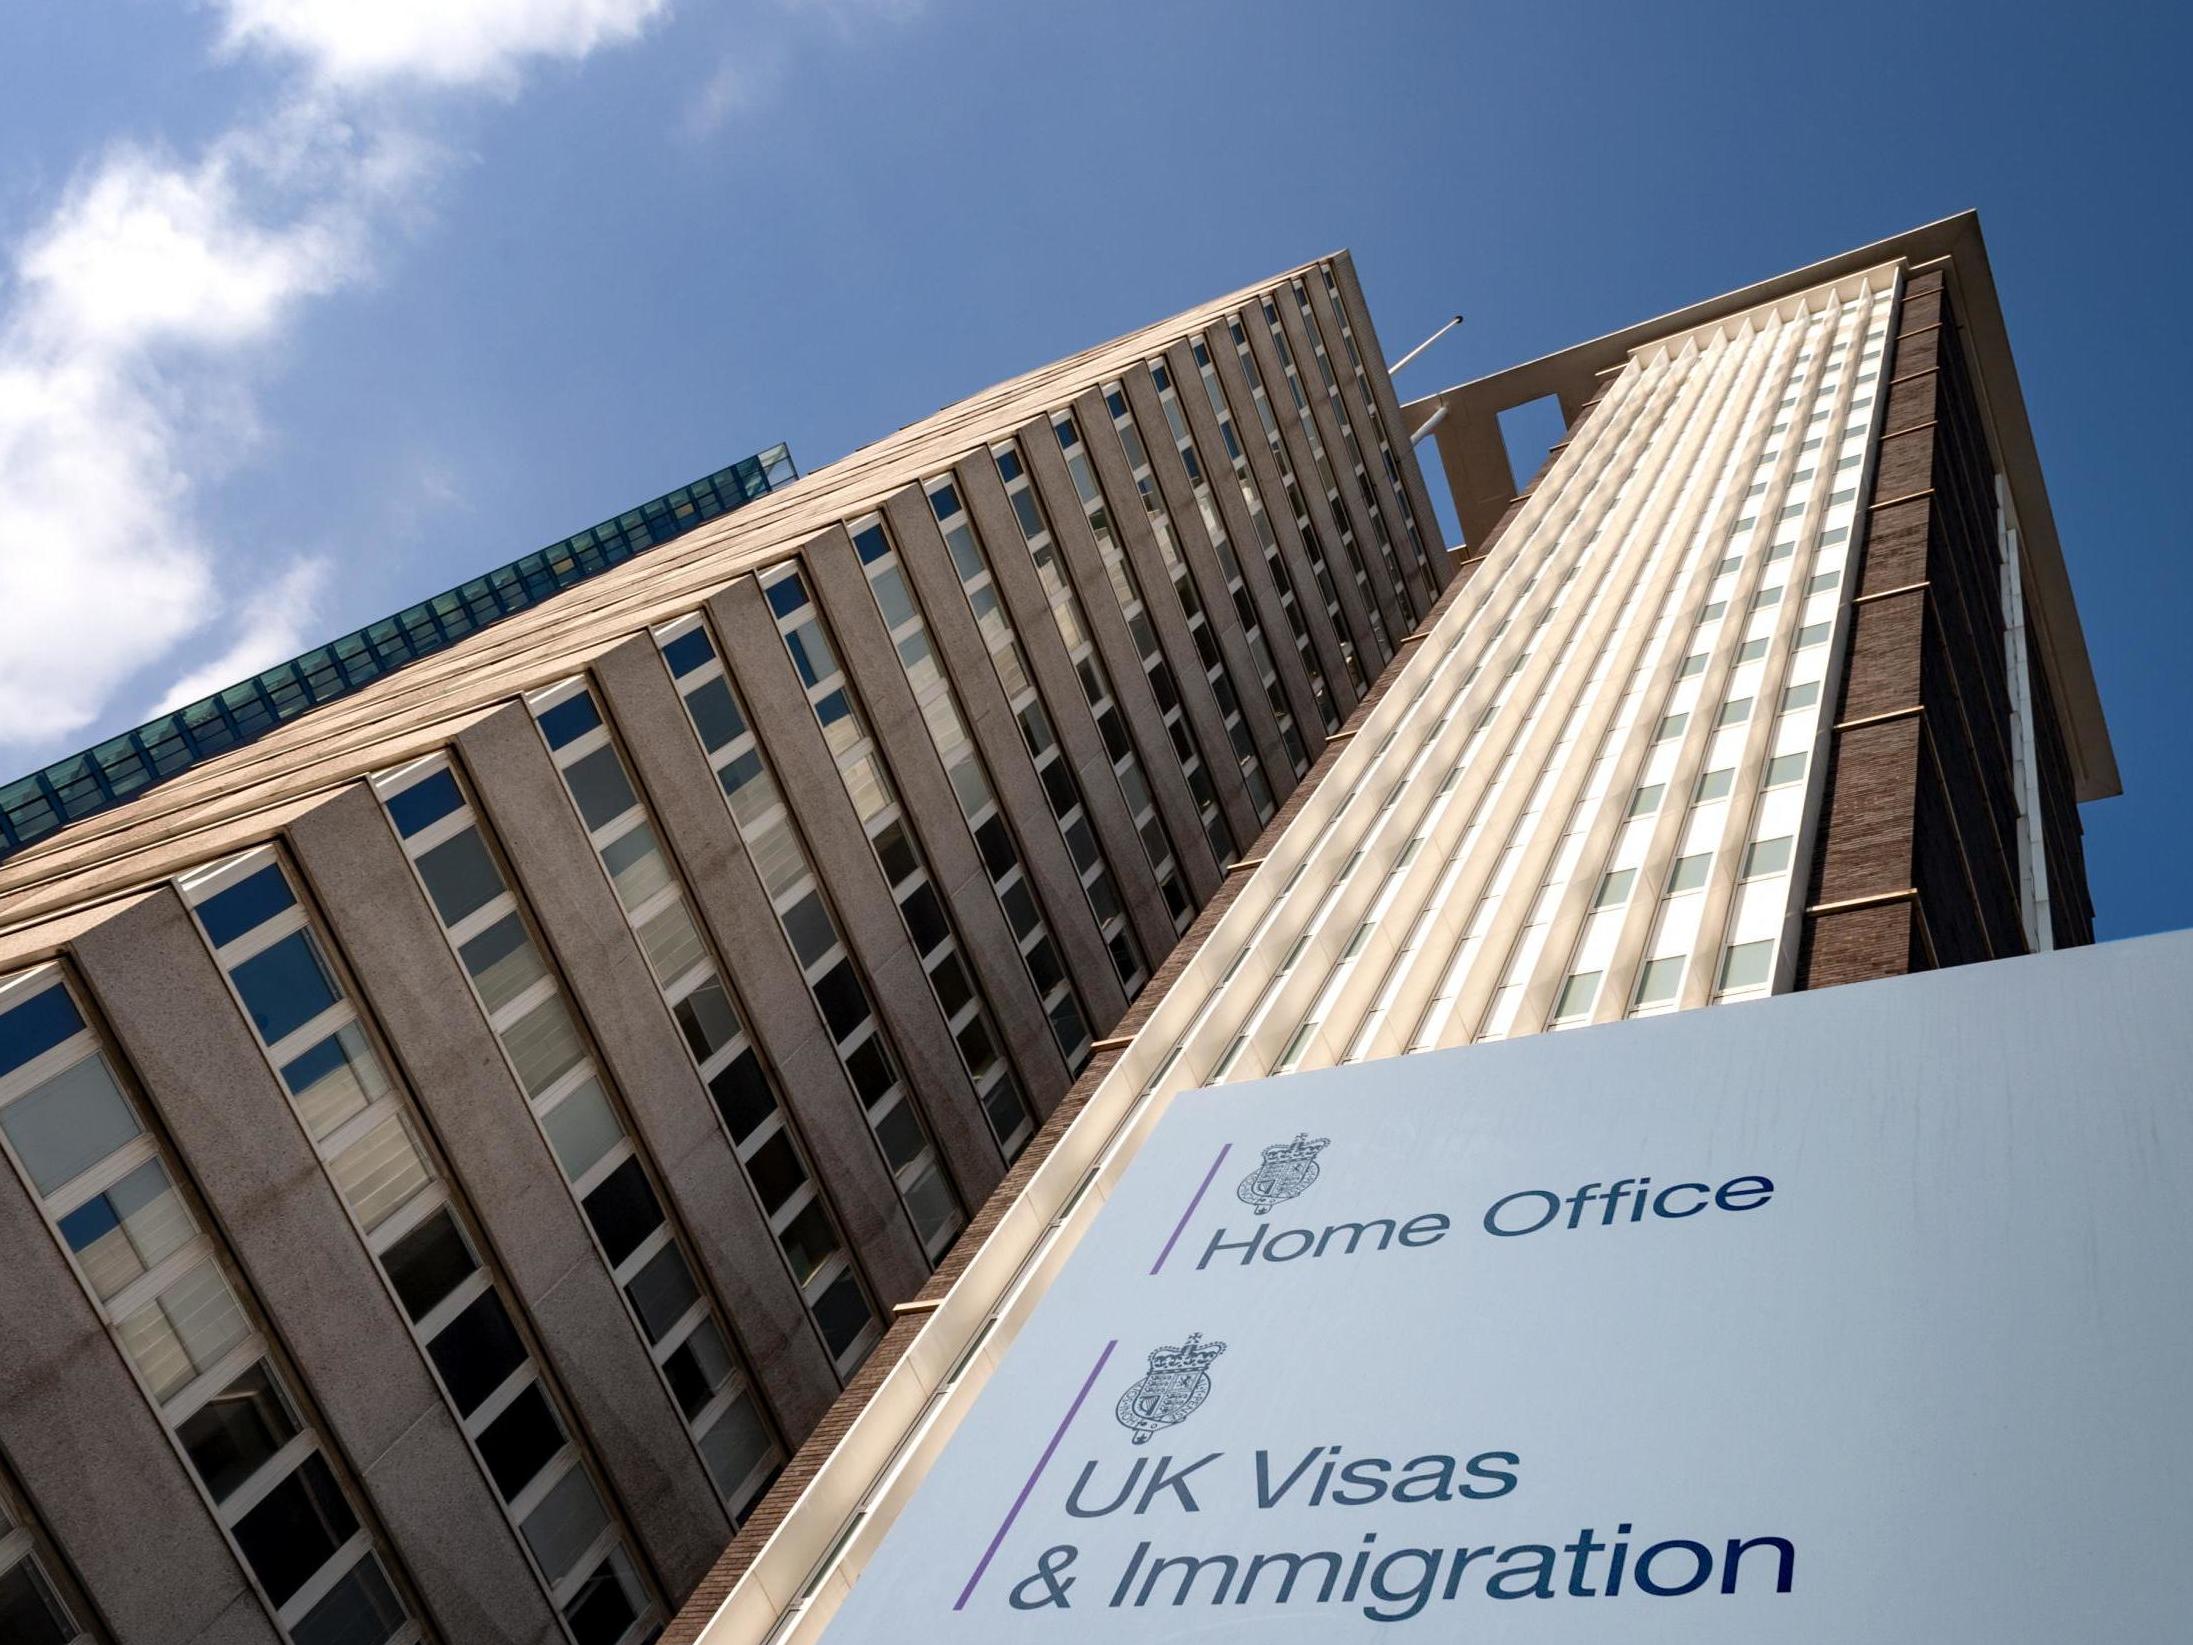 The Home Office stands accused of ‘bureaucracy and incompetence’